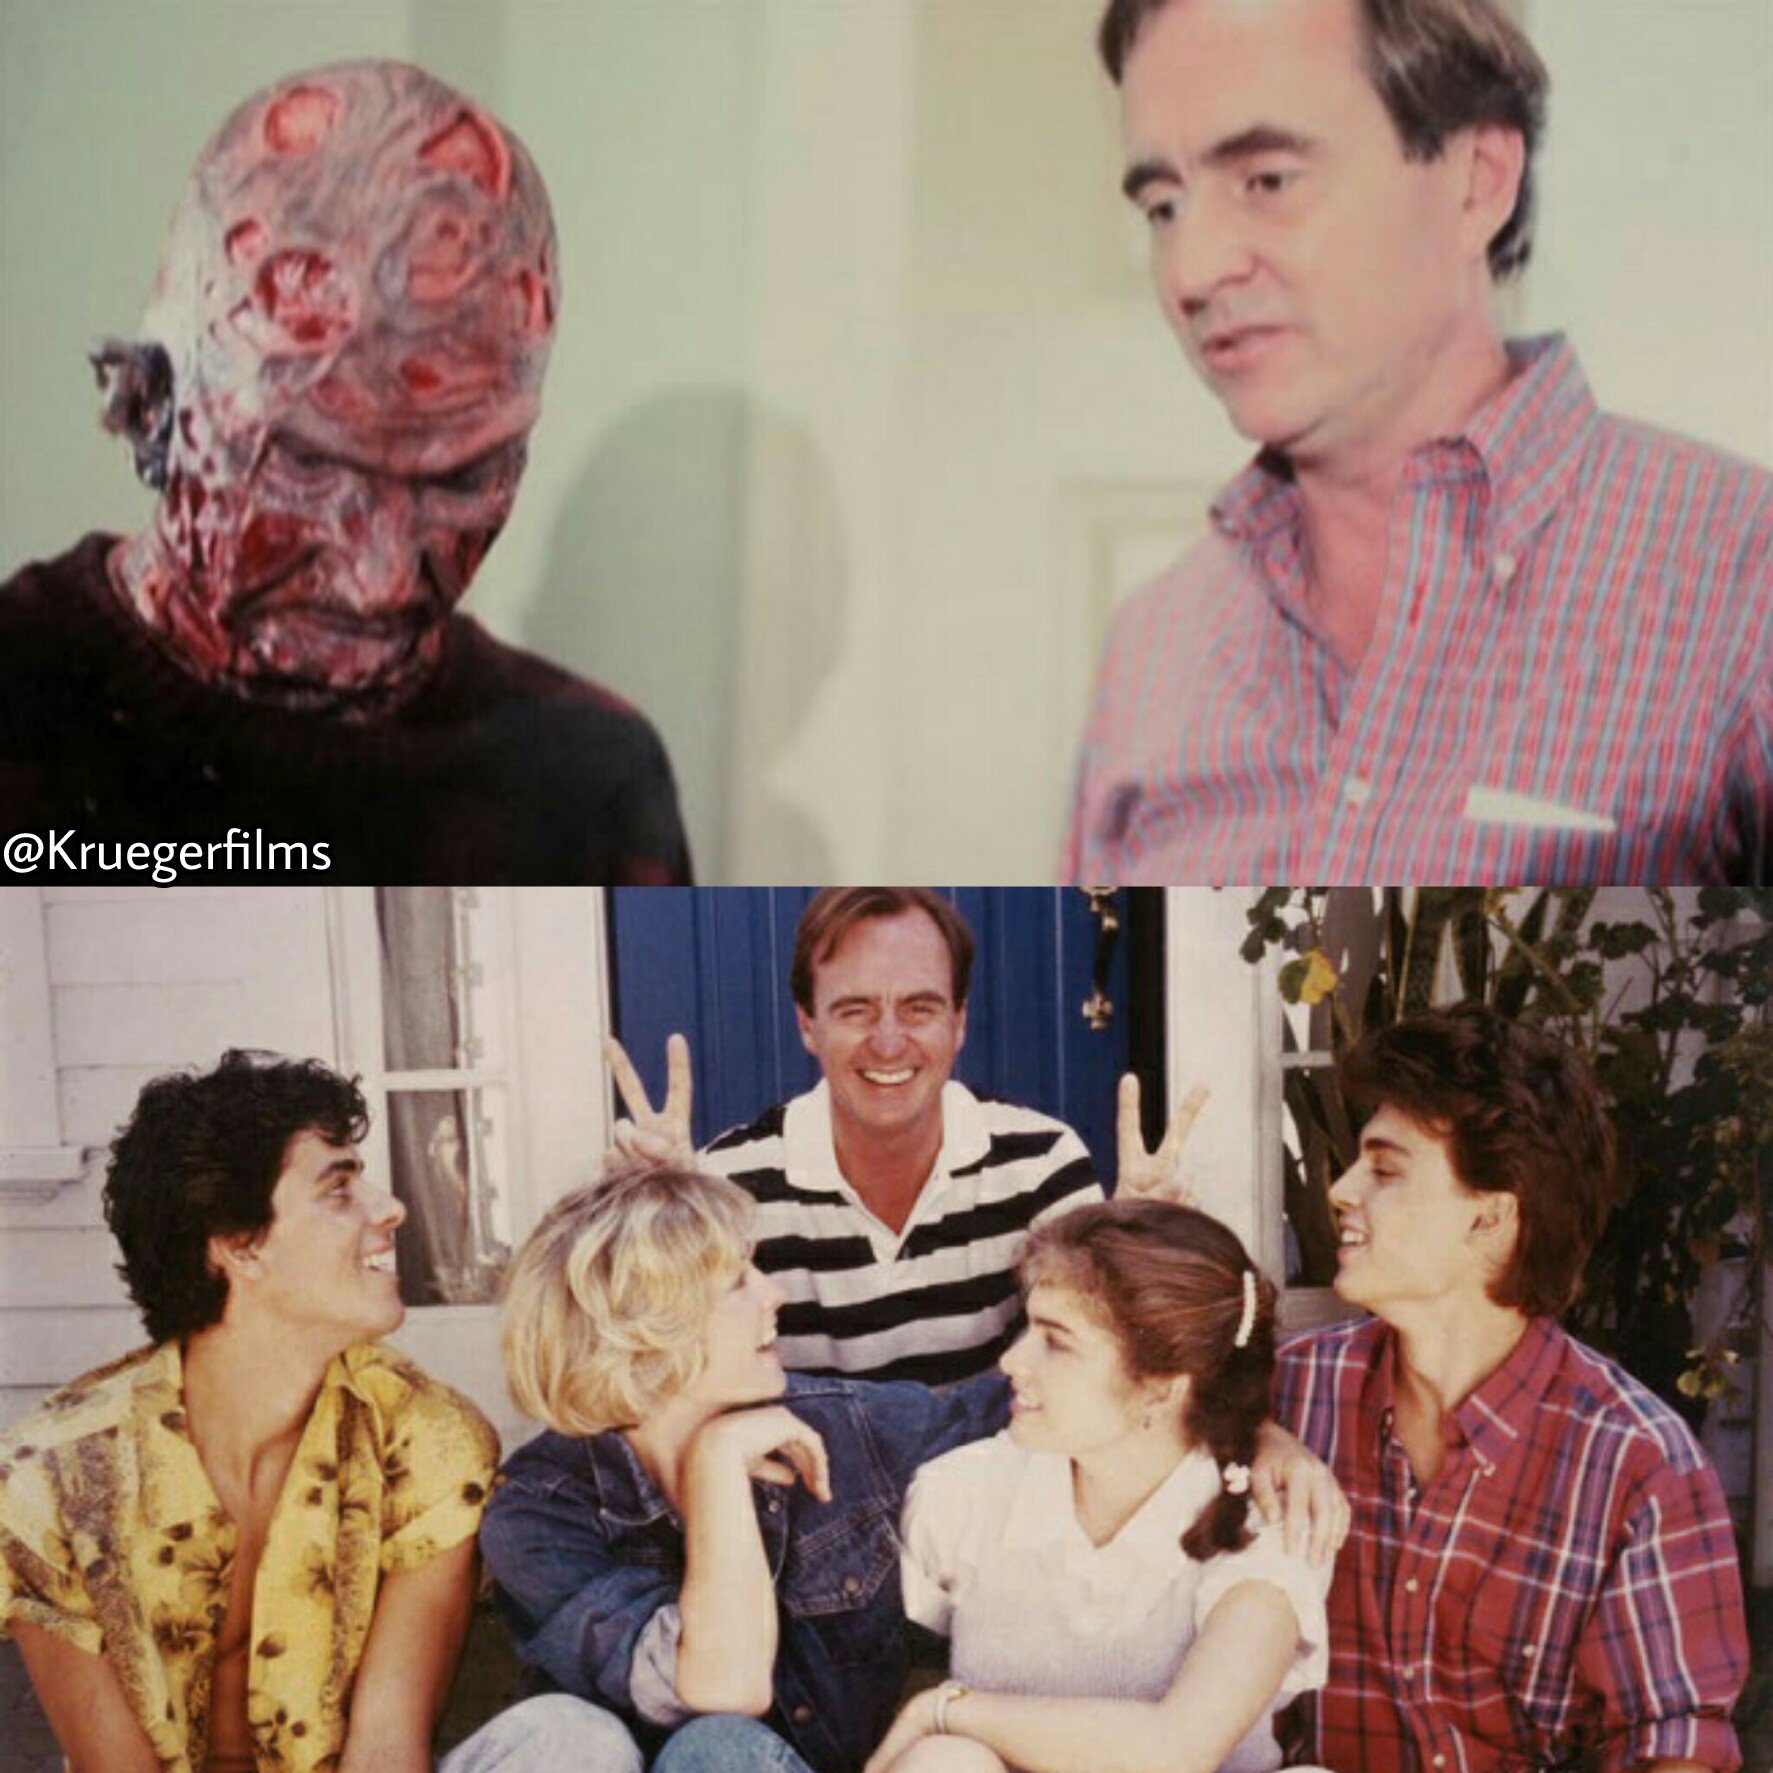 Happy birthday Wes Craven! Thank you for the nightmares. 